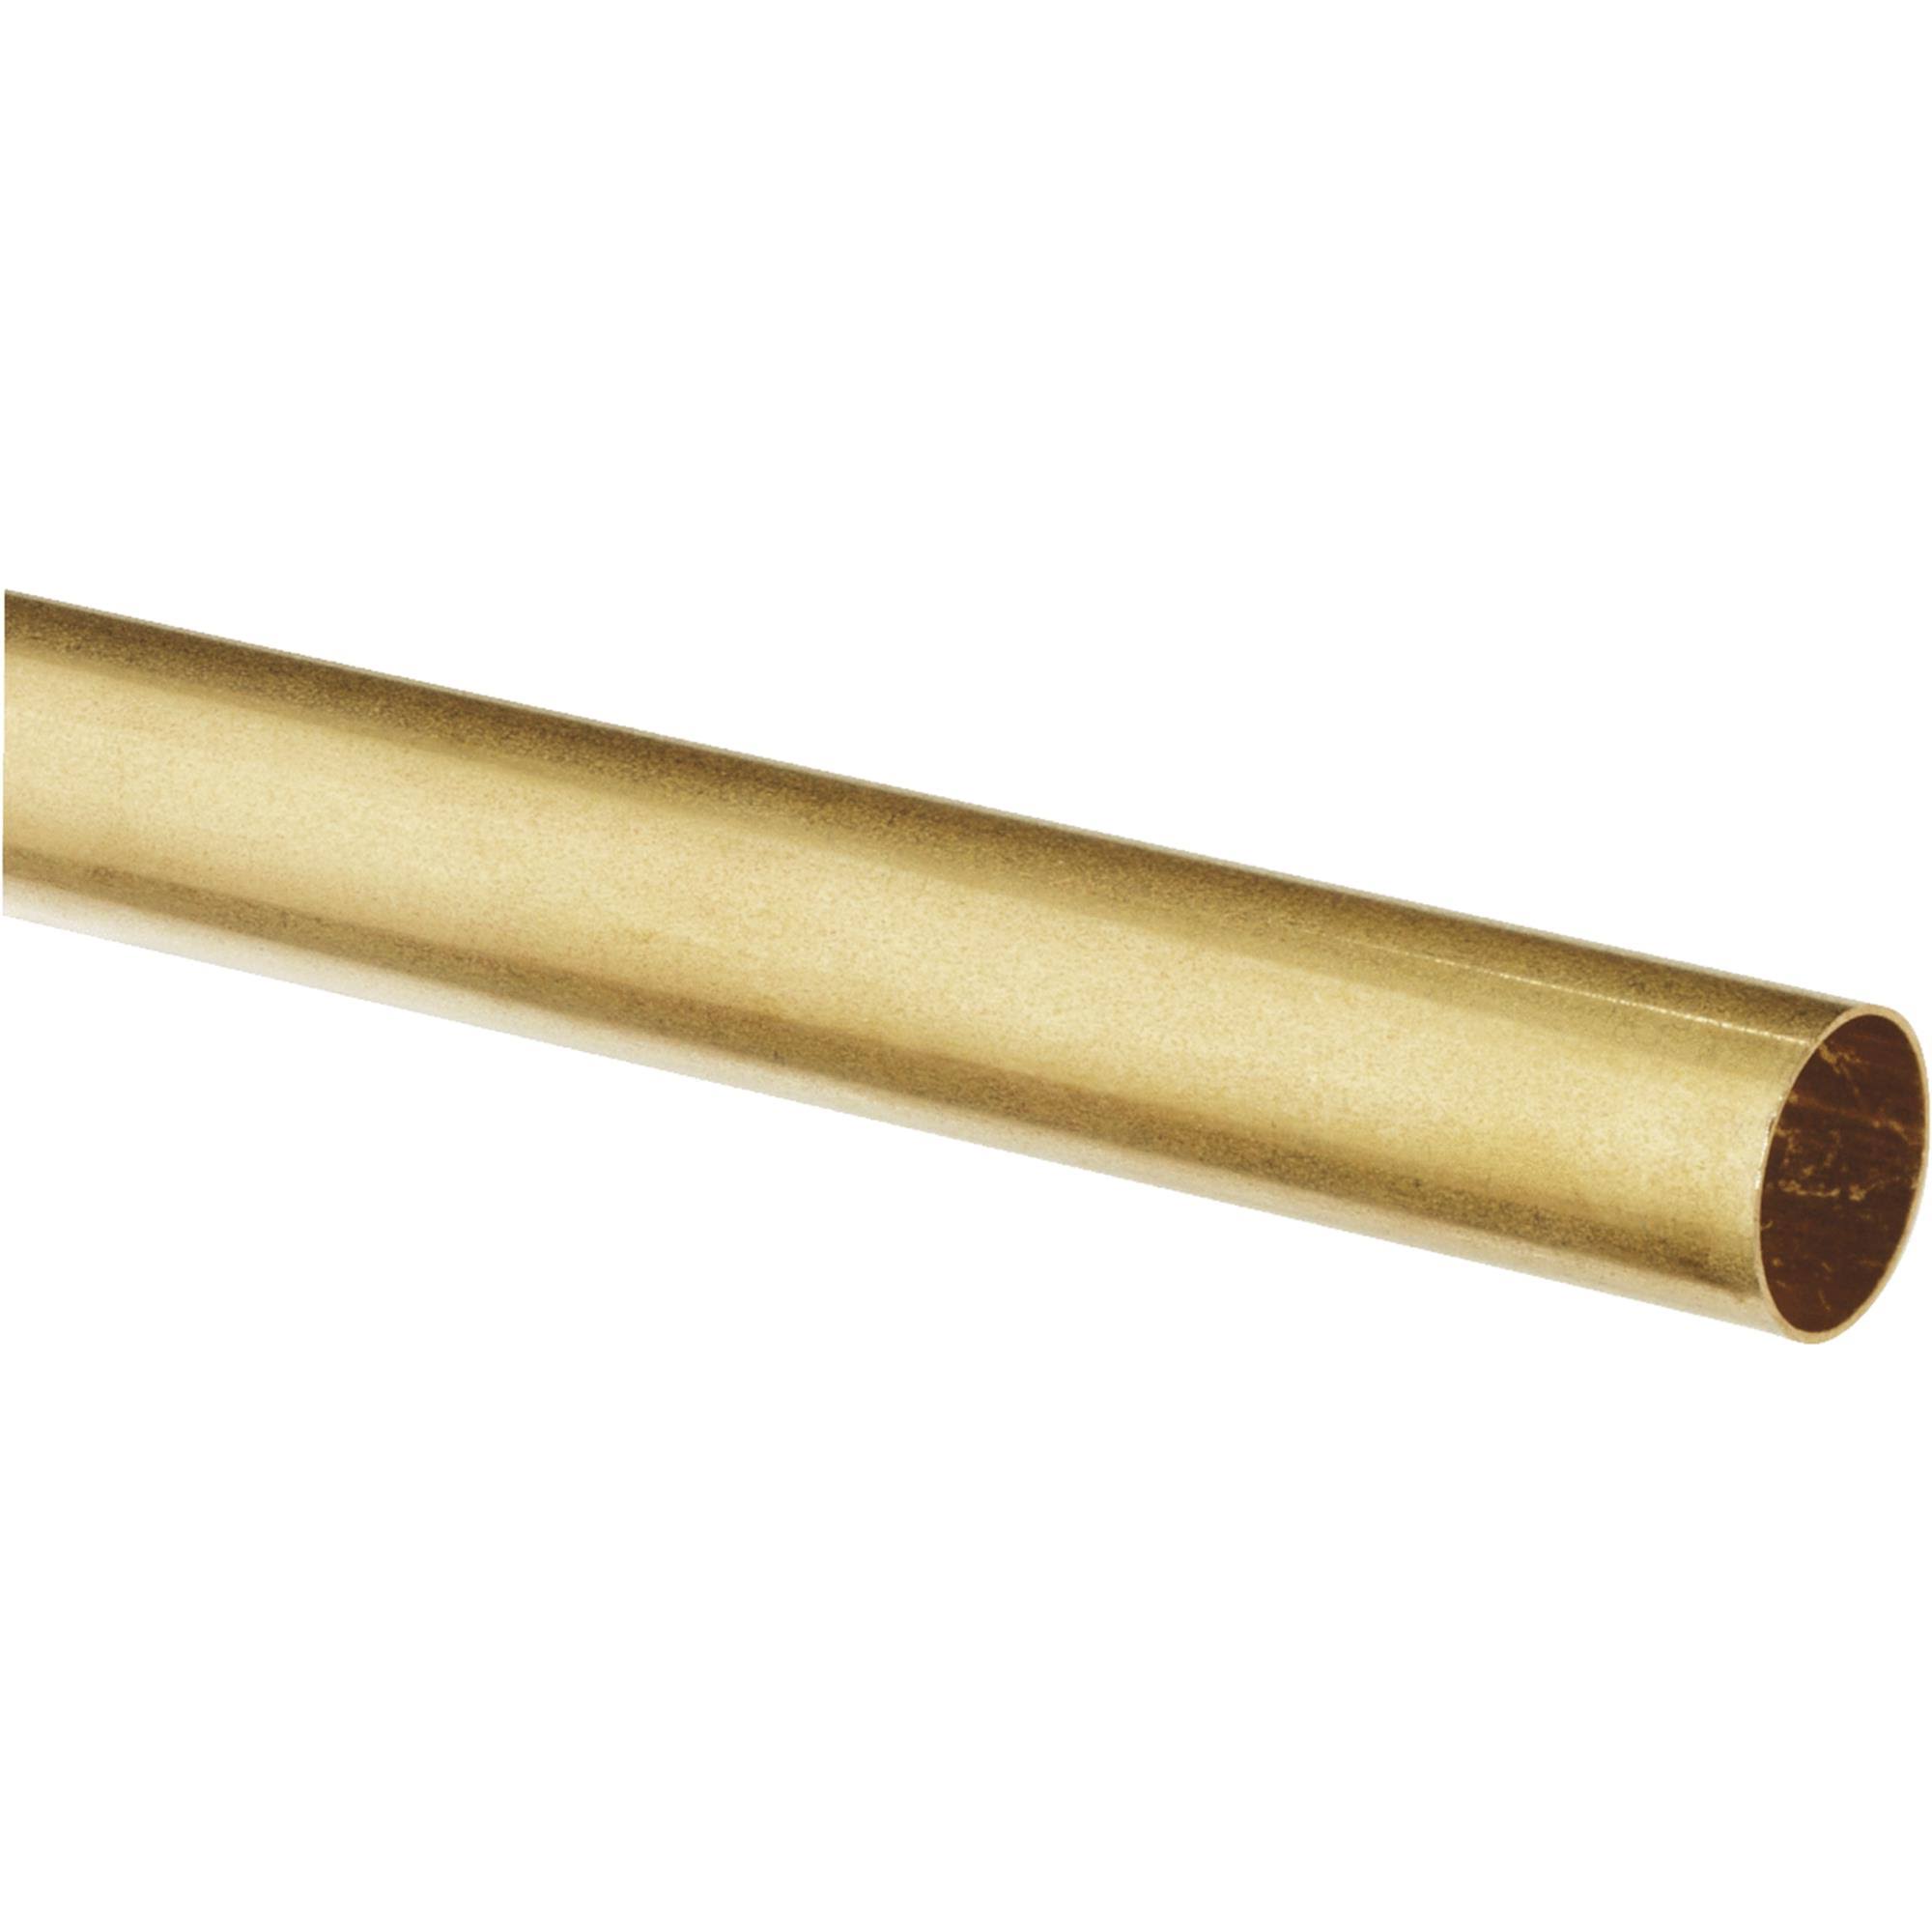 K&S [8134] 12in 11/32 Round Brass Tube .014 Wall